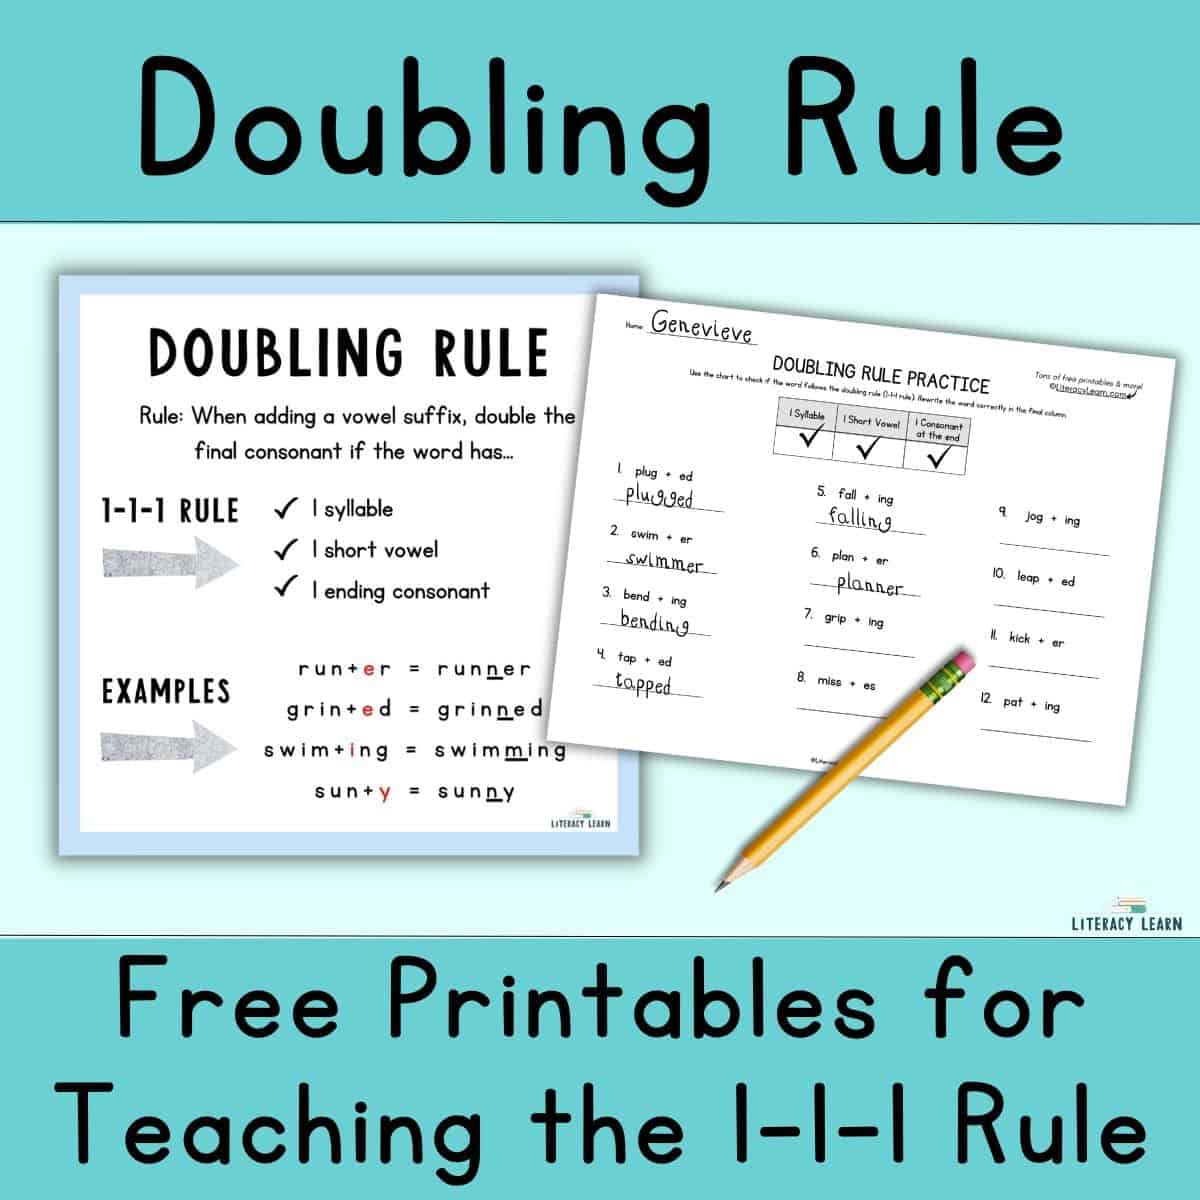 Blue image titled "Doubling Rule" with pictures of graphic, free worksheet, and pencil.